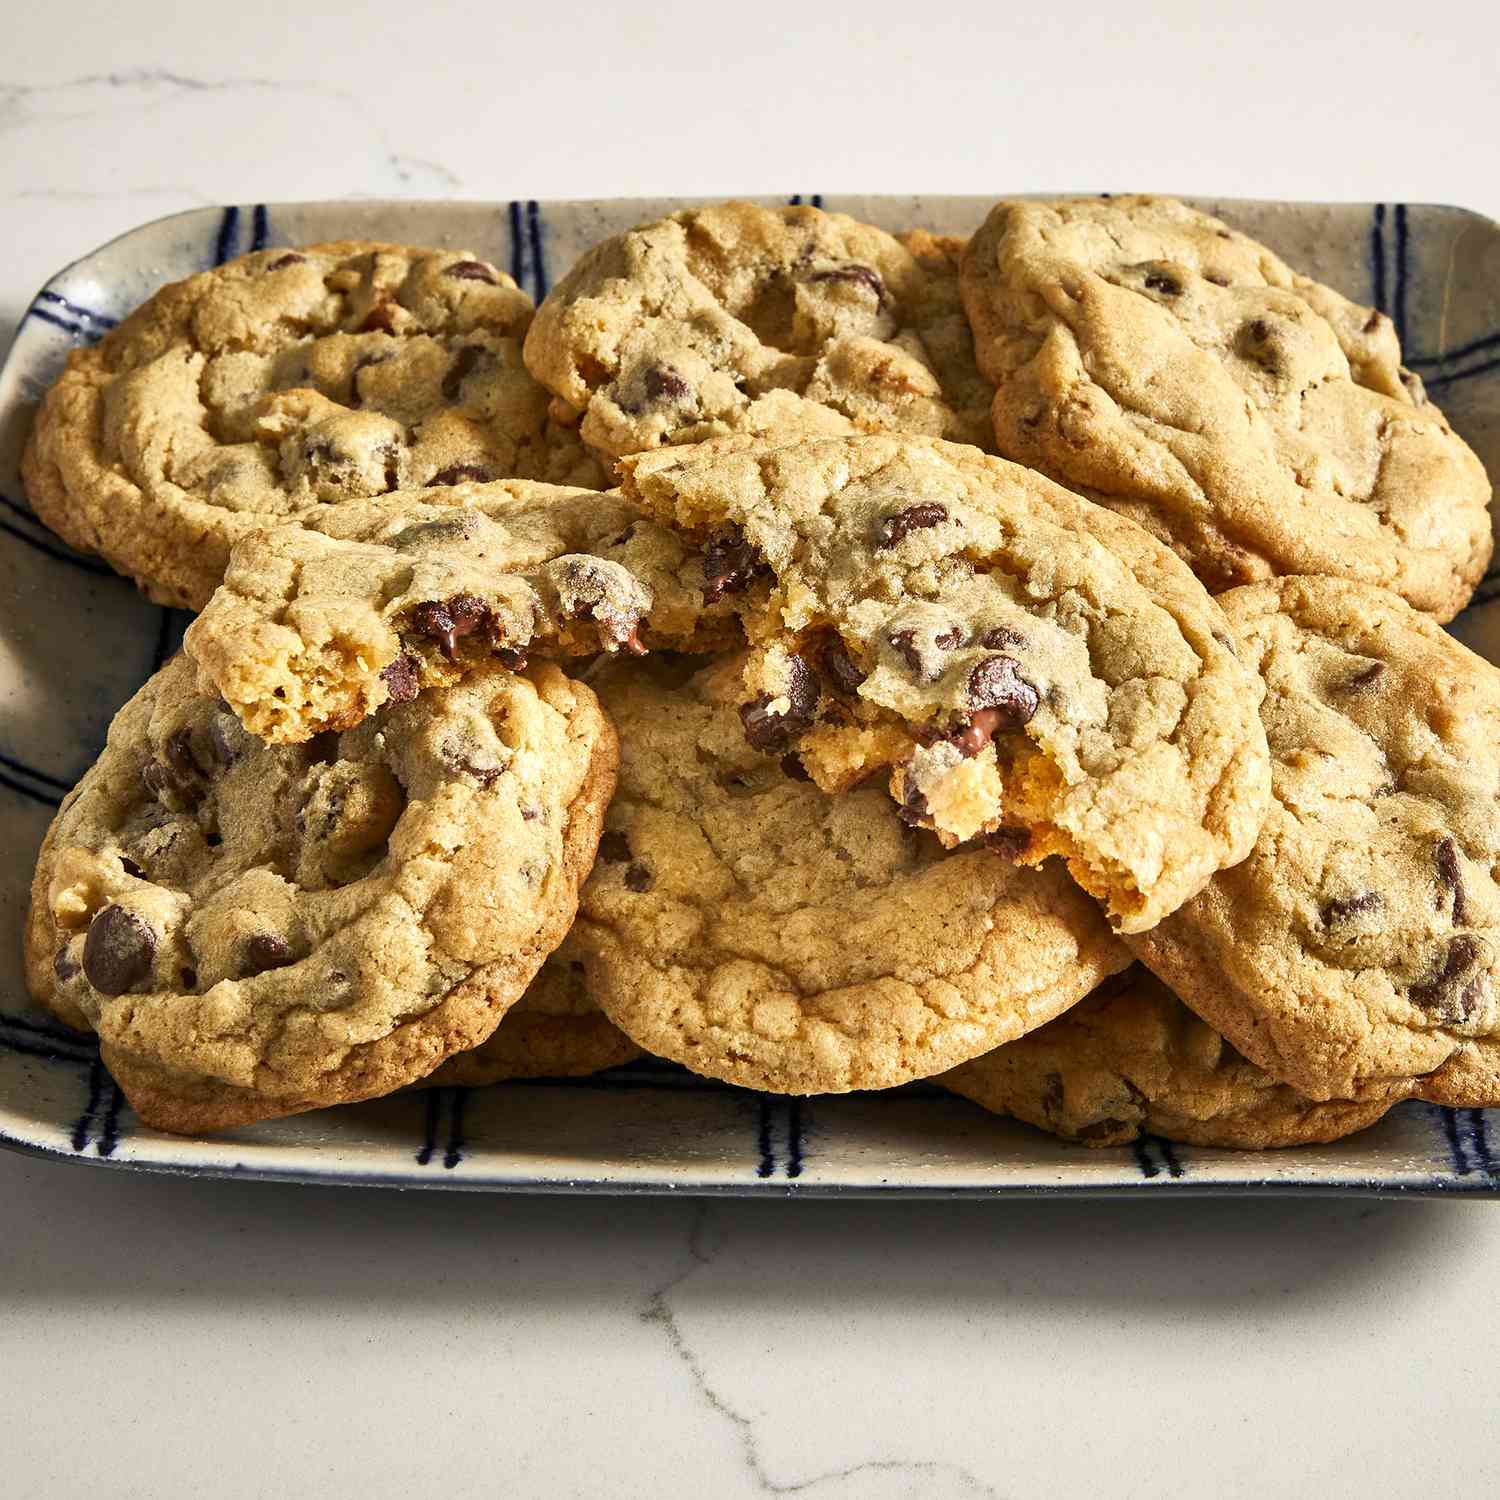 My Big, Fat, Chewy Chocolate Chip Cookies - The Girl Who Ate Everything